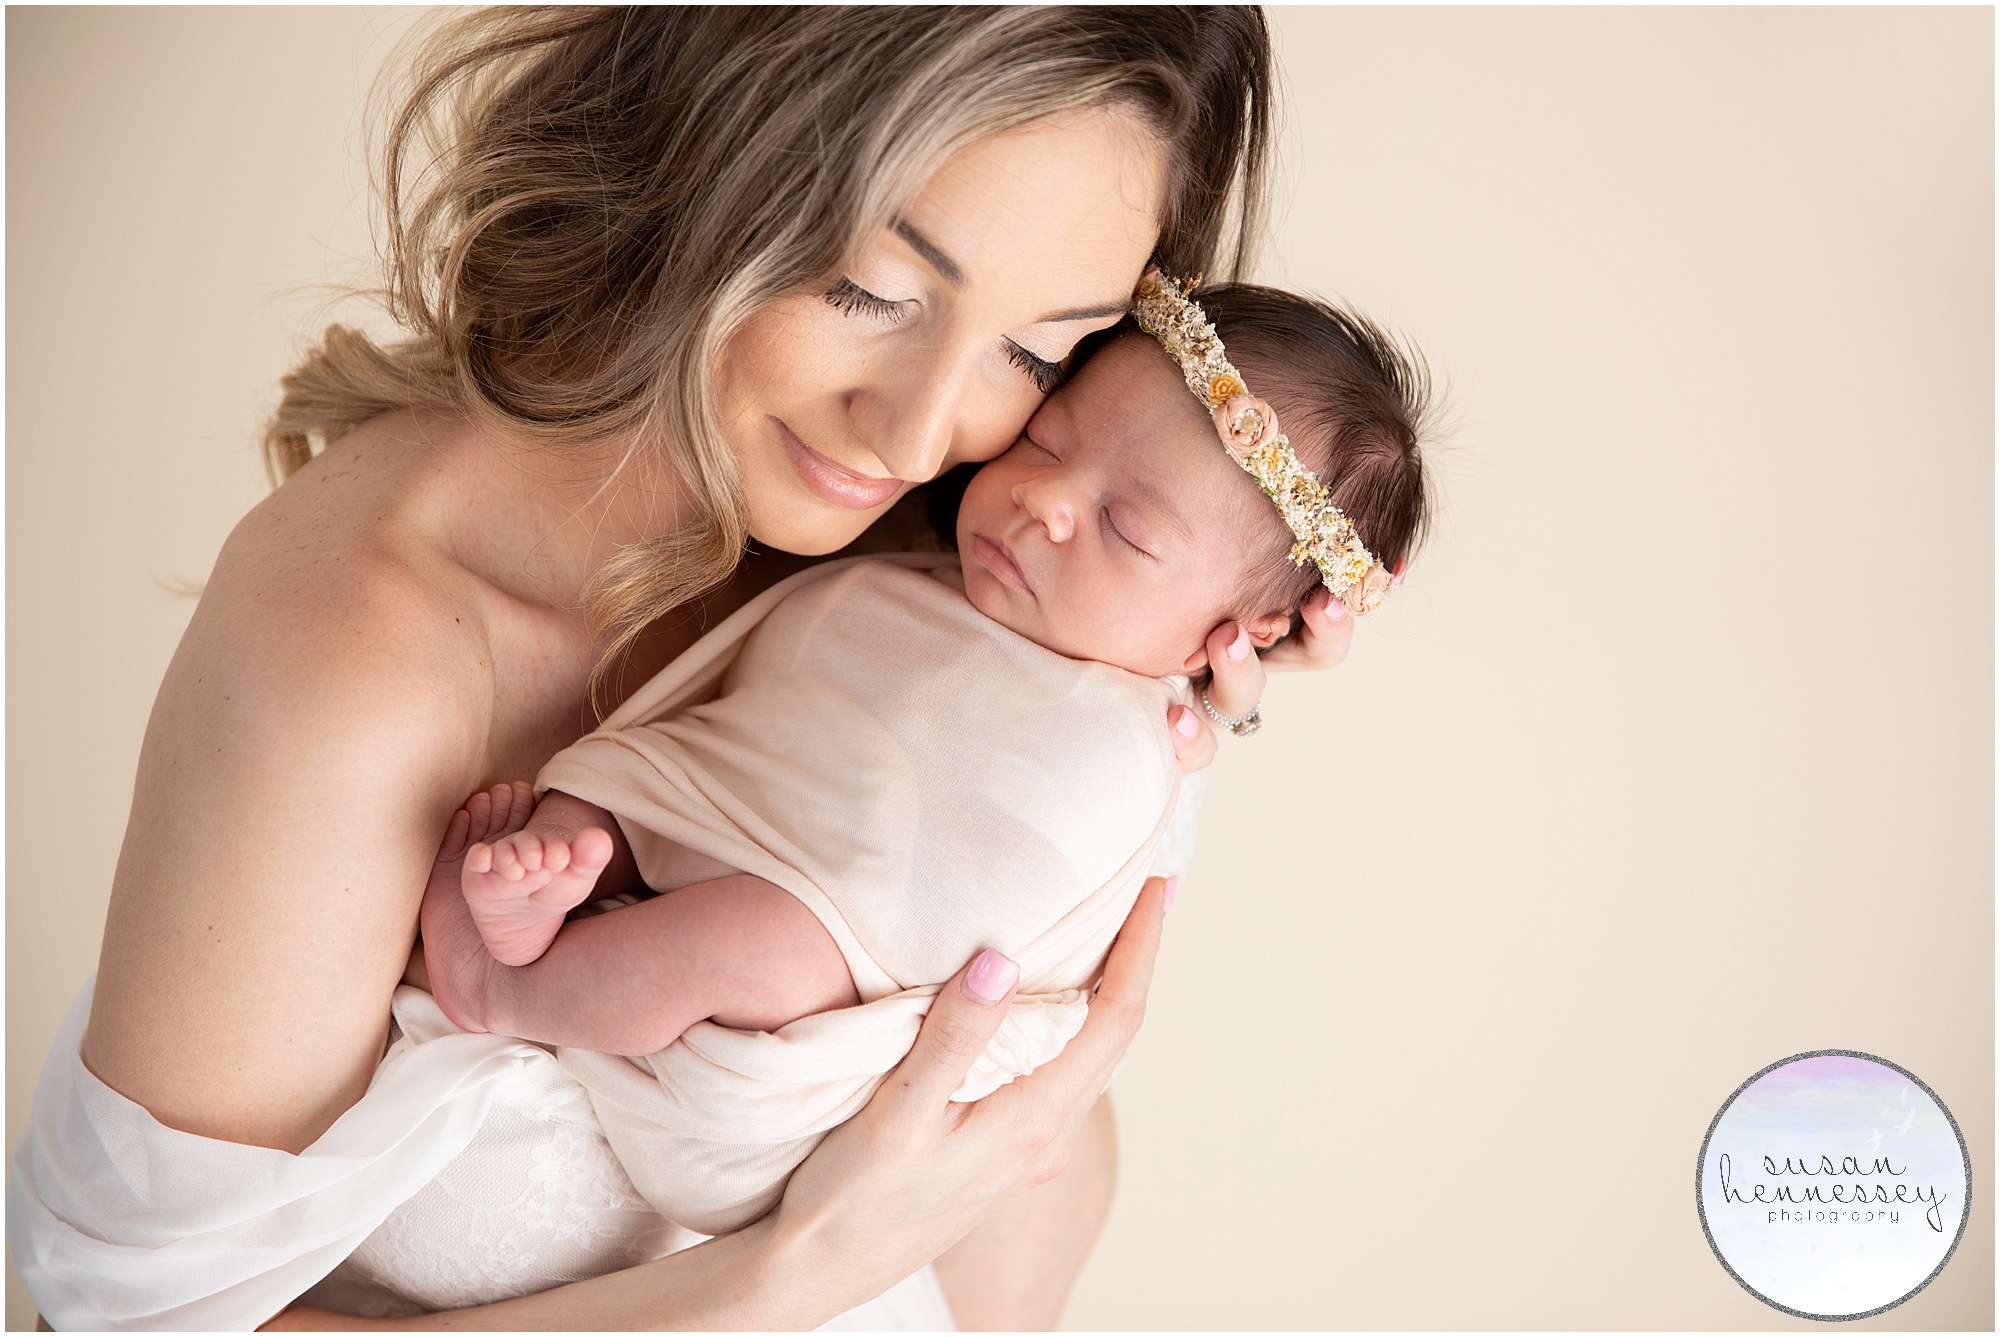 Susan Hennessey Photography is a Moorestown based photographer who offers in studio newborn sessions.